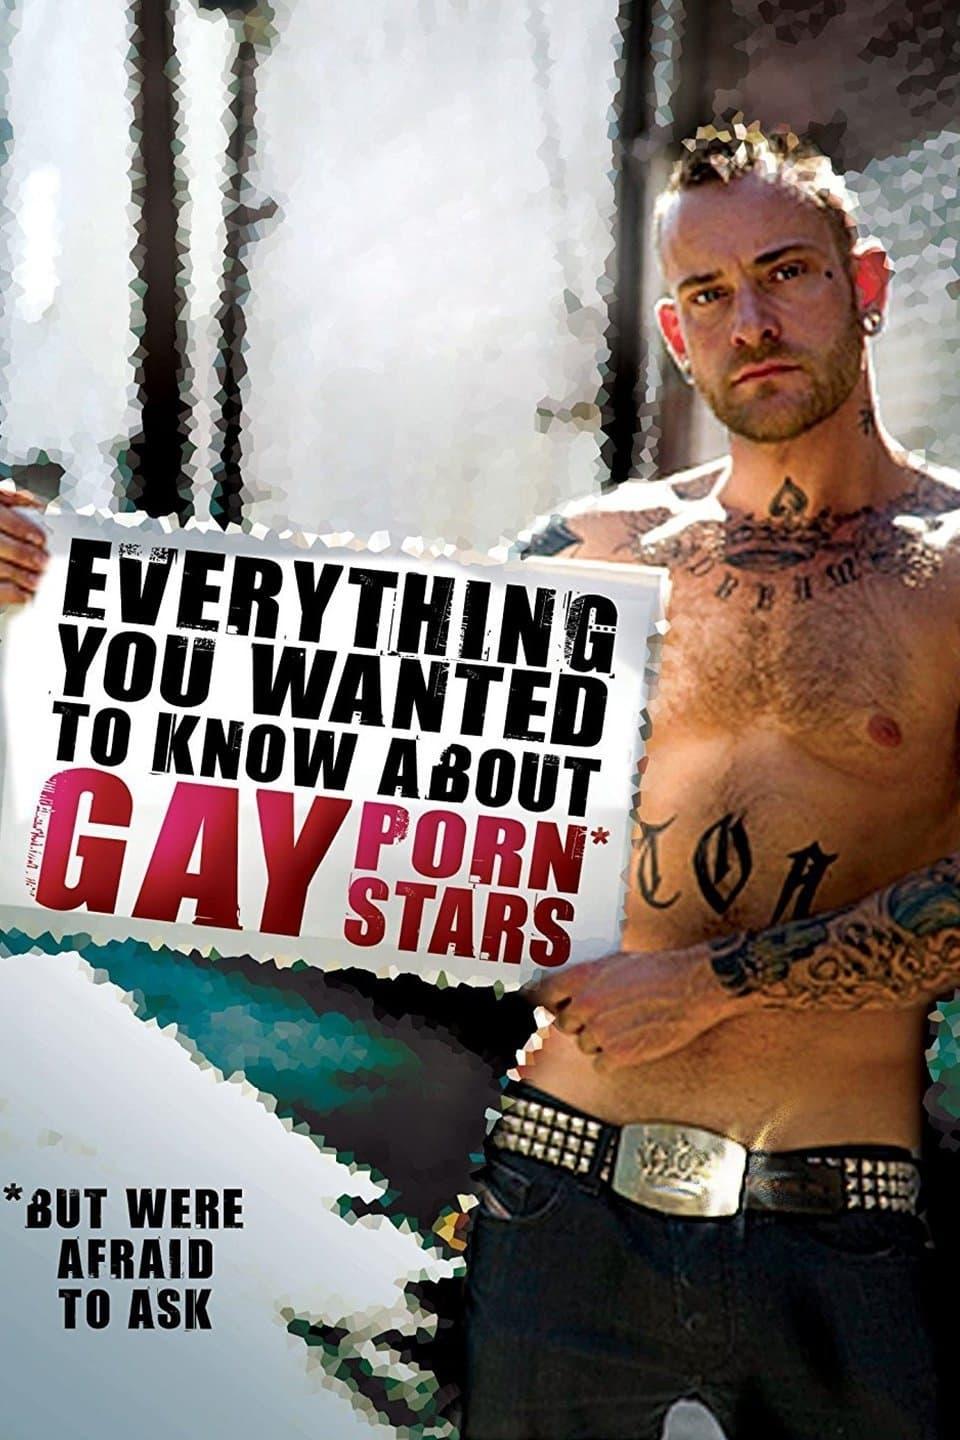 Everything You Wanted to Know About Gay Porn Stars: The Movie poster